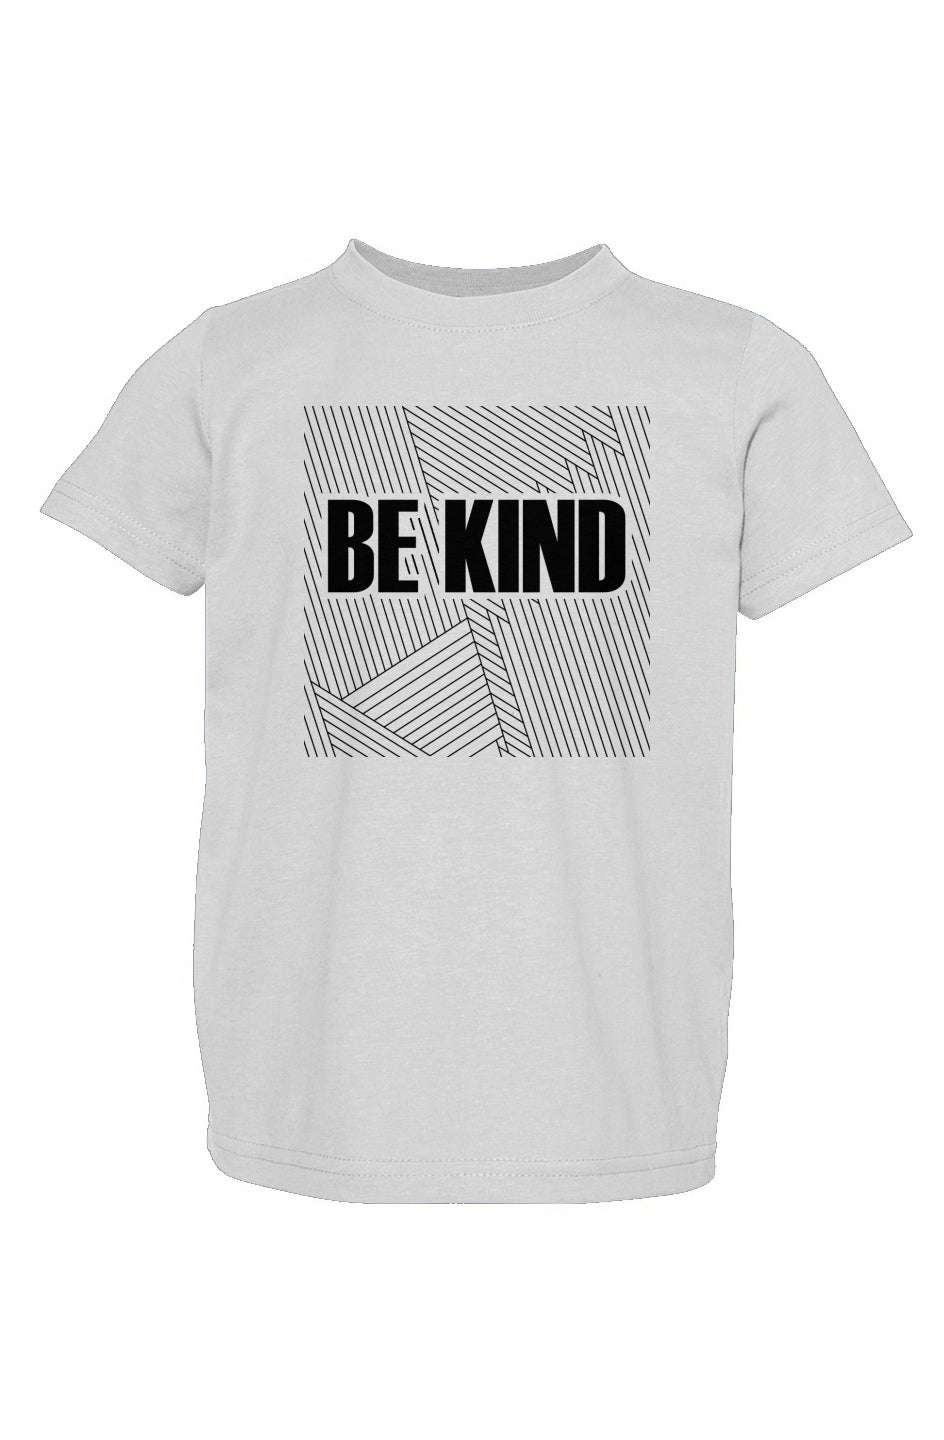 Toddler “BE KIND” tee